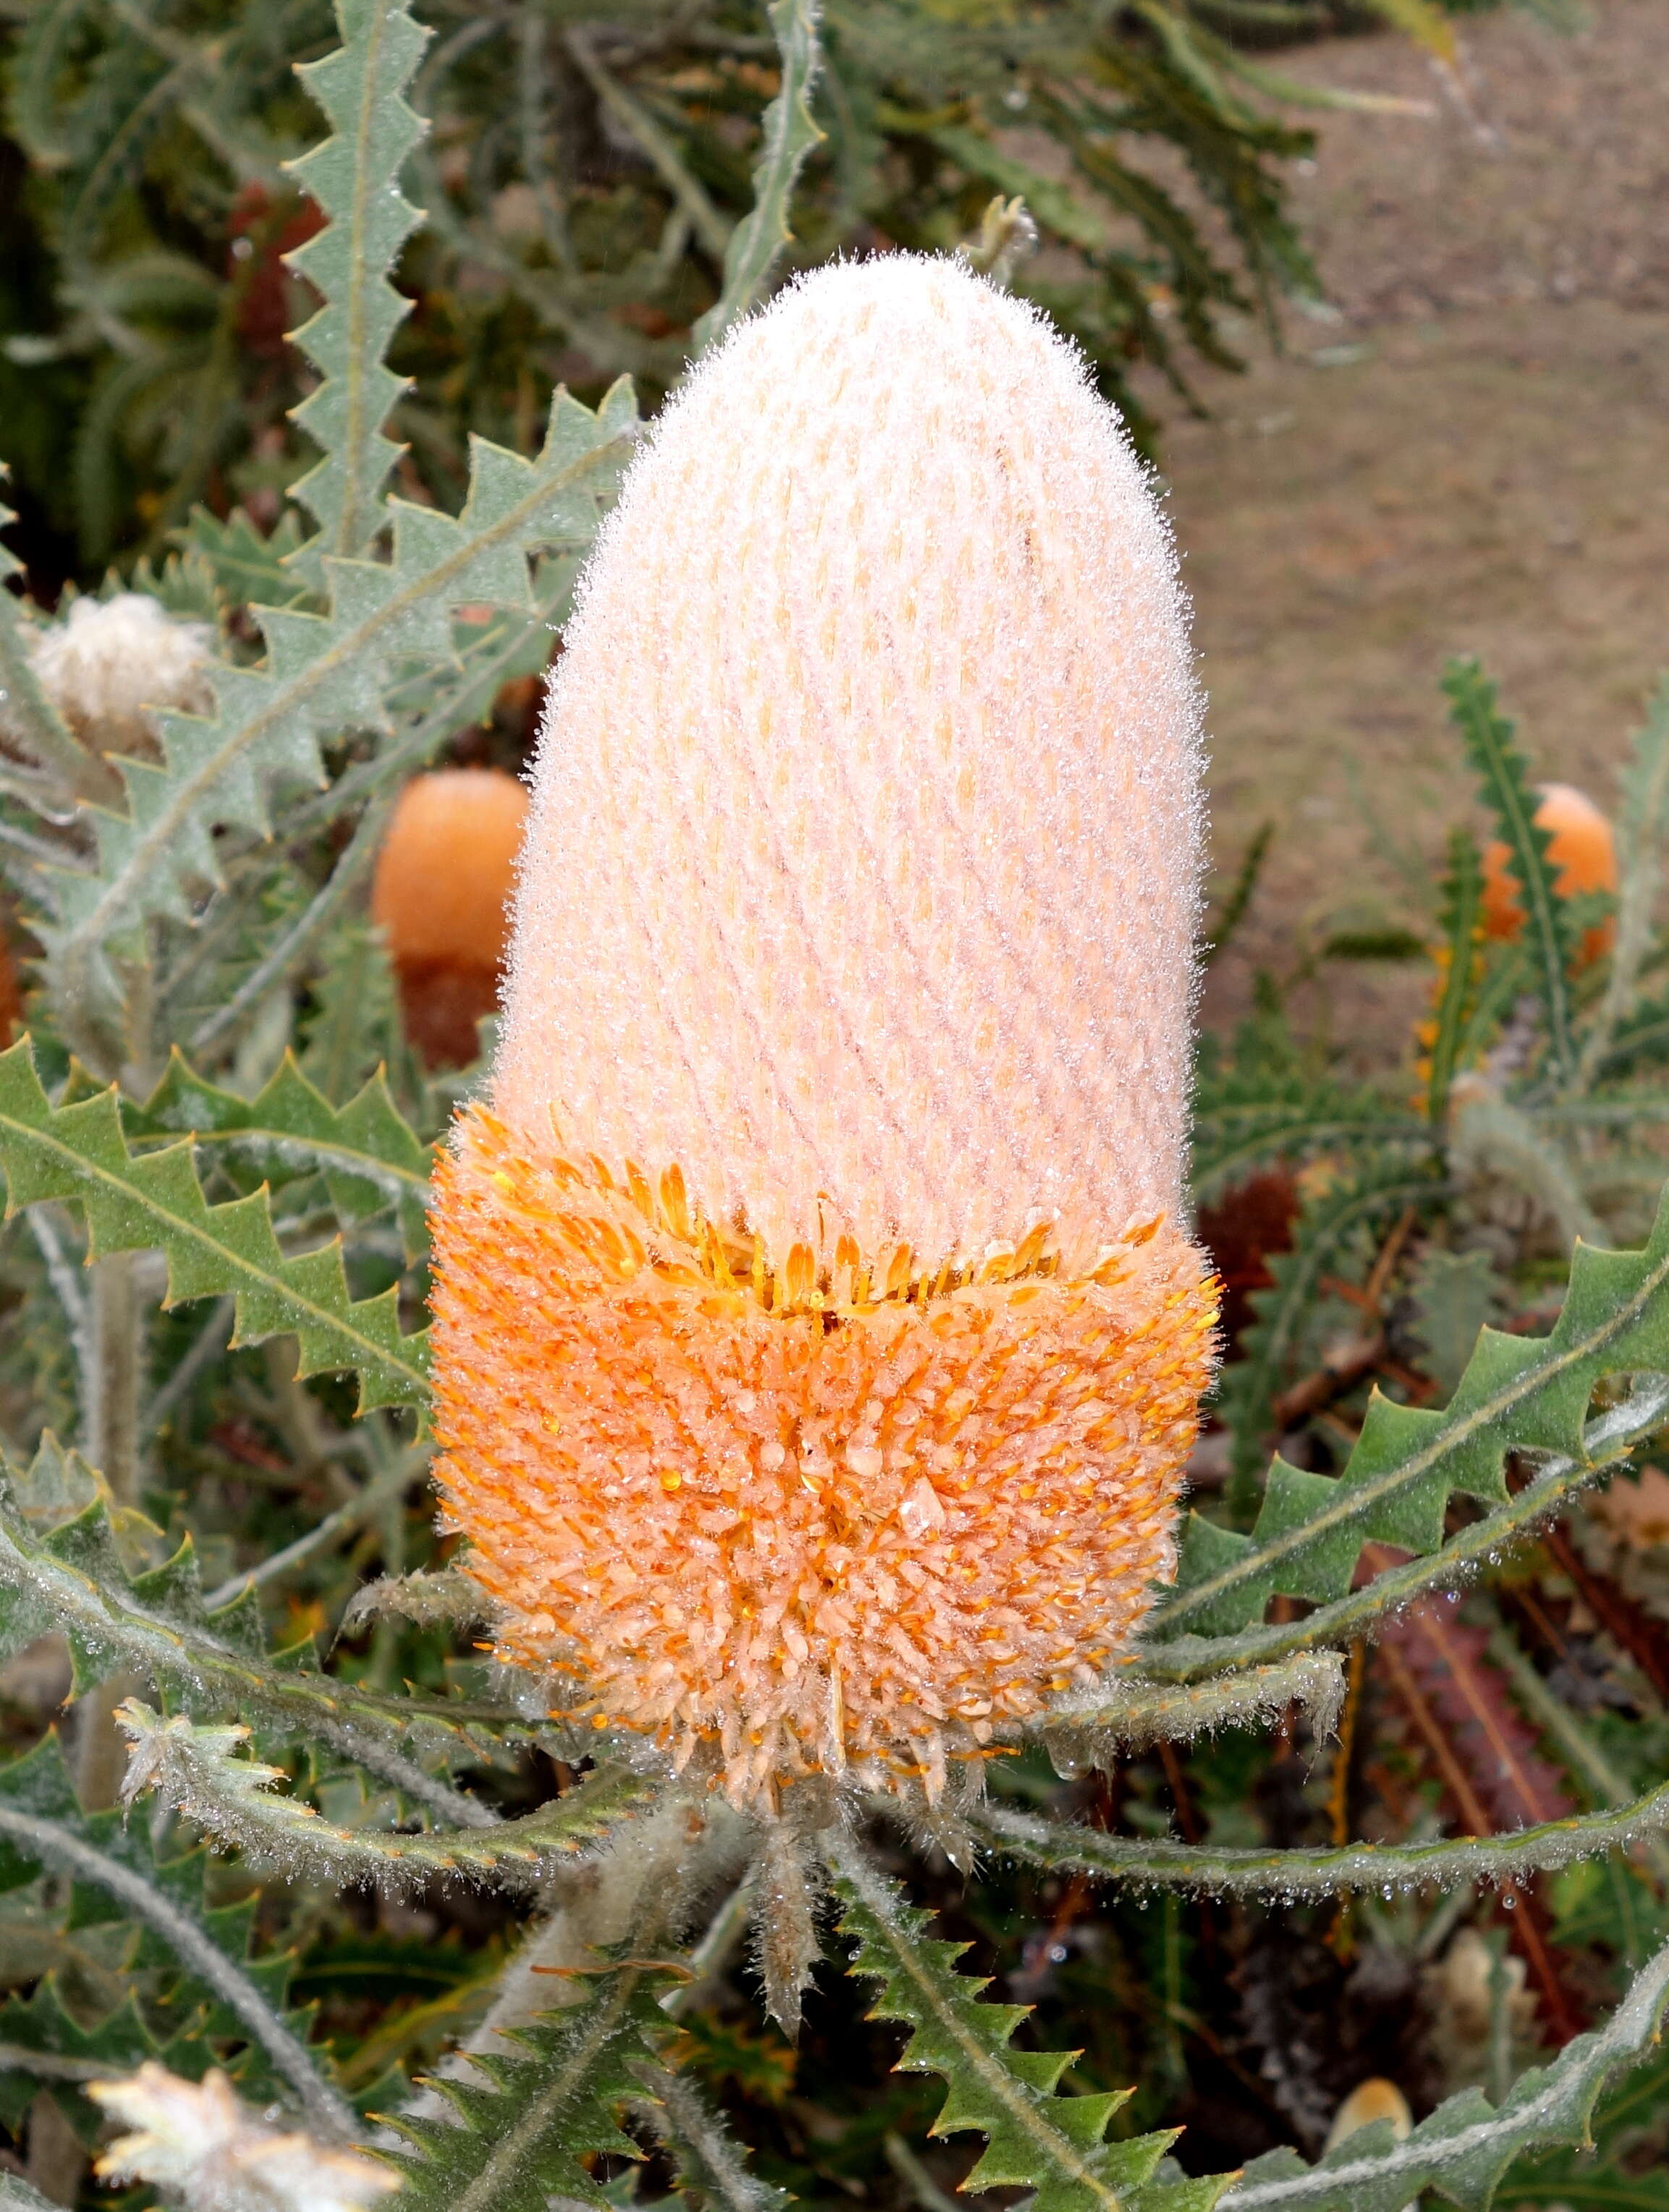 Image of Banksia victoriae Meissn.